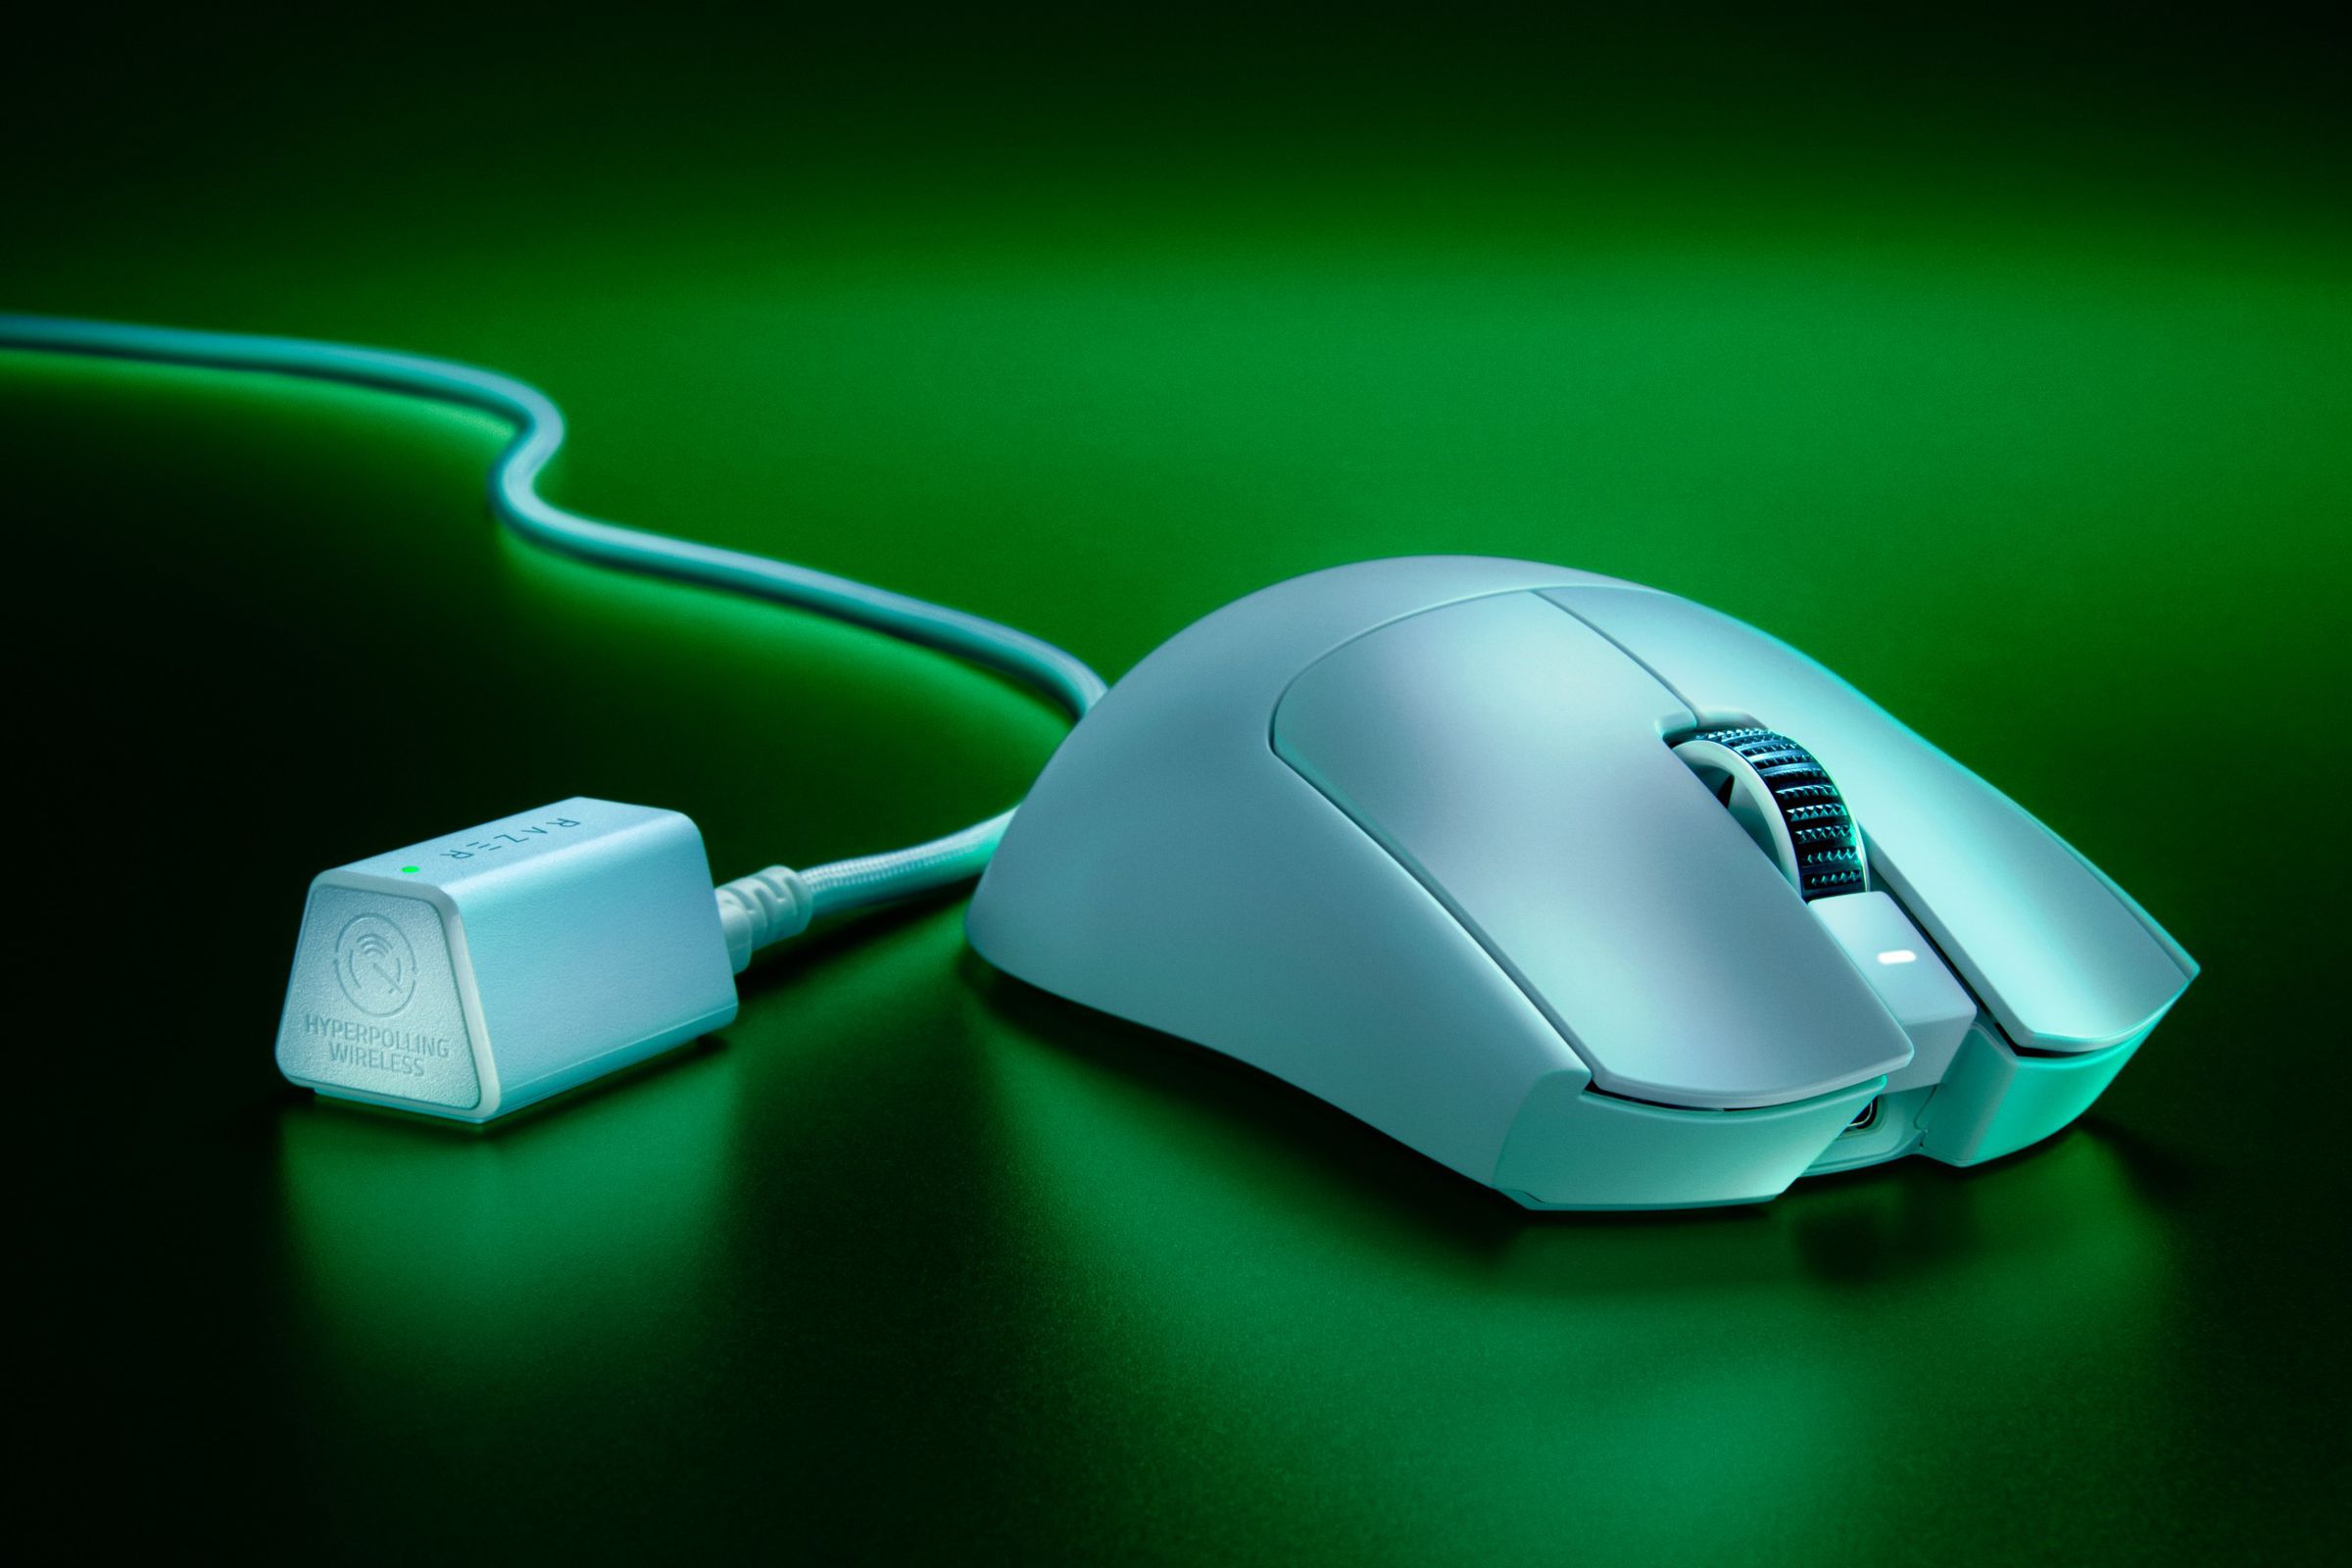 A white mouse with a typical sculpted rounded Razer design, somewhat evoking a hooded snake